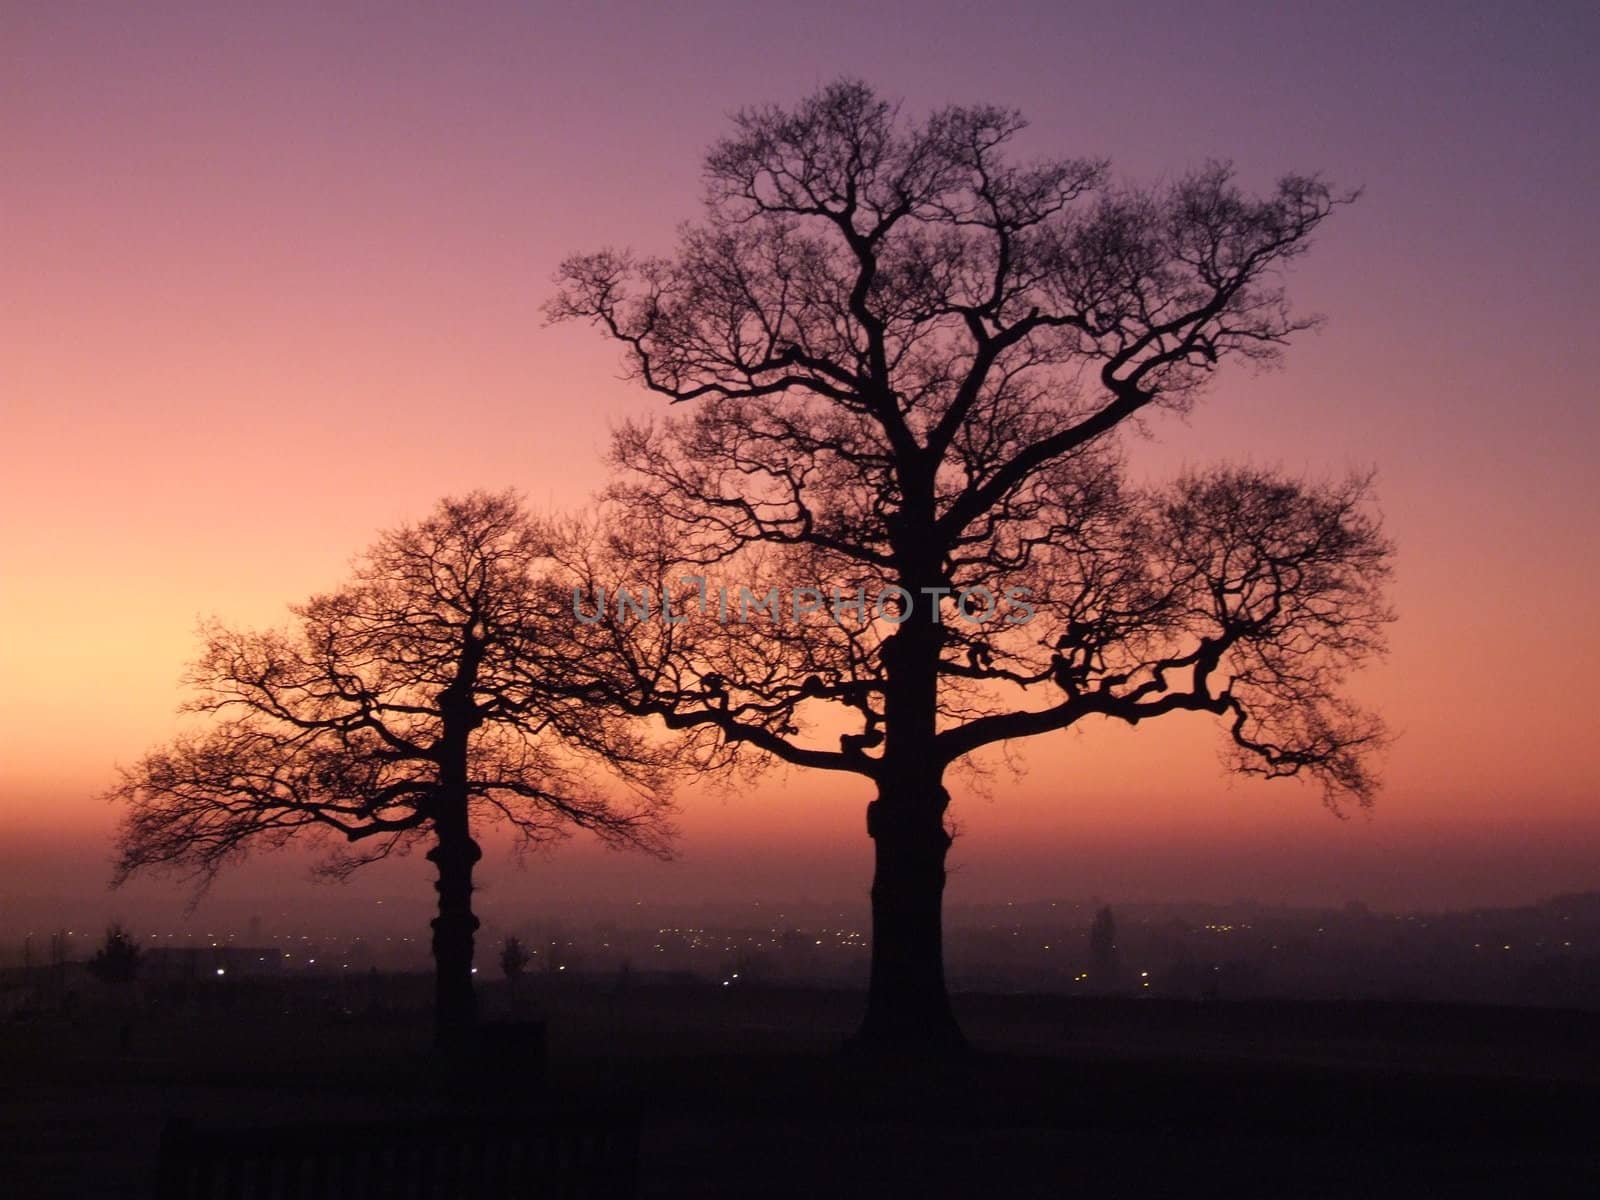 Red Sunset with Two Trees over Looking London